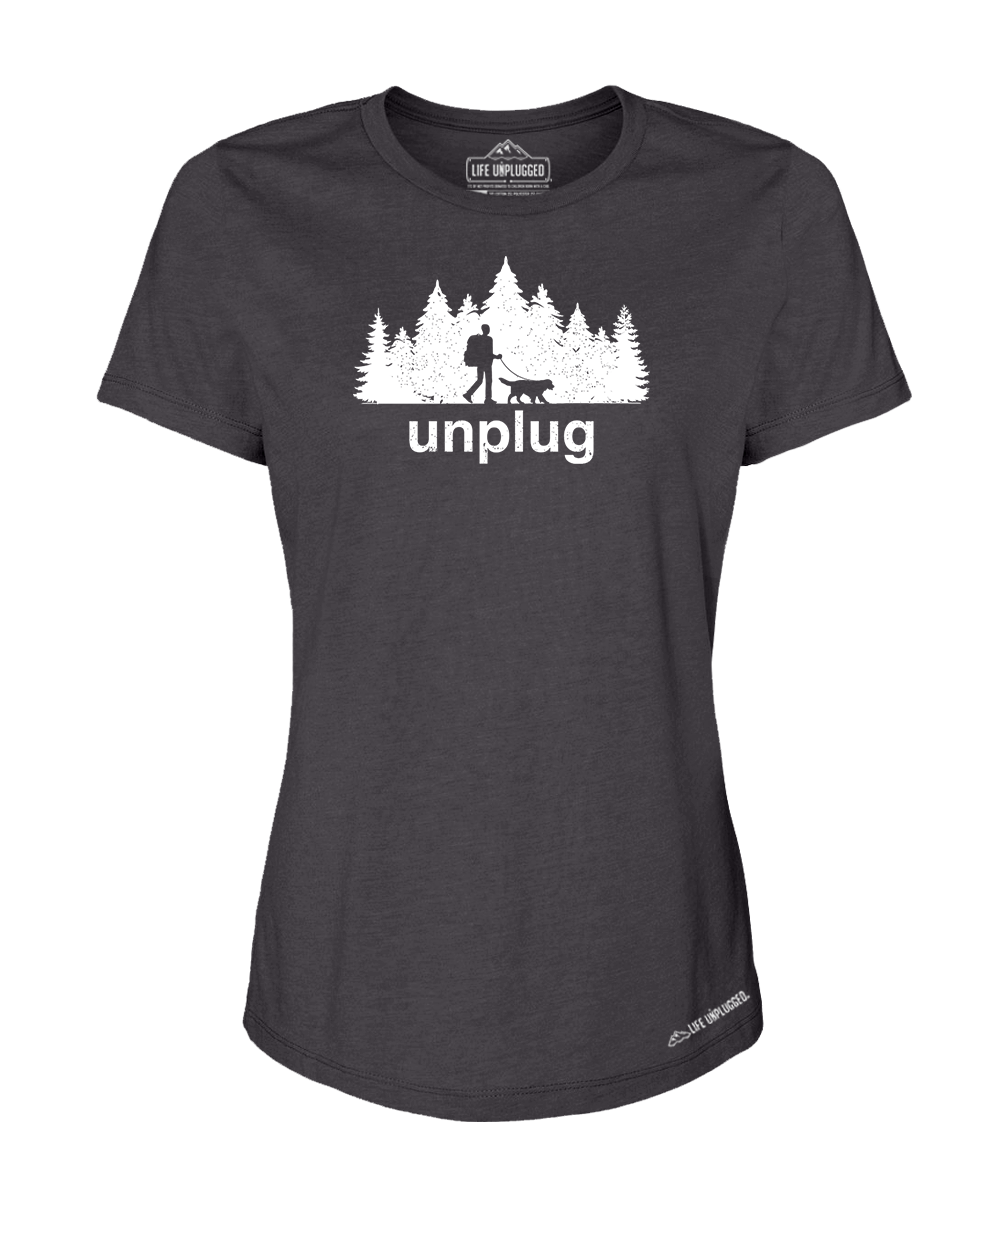 Dog Walks in the Woods Premium Women's Relaxed Fit Polyblend T-Shirt - Life Unplugged